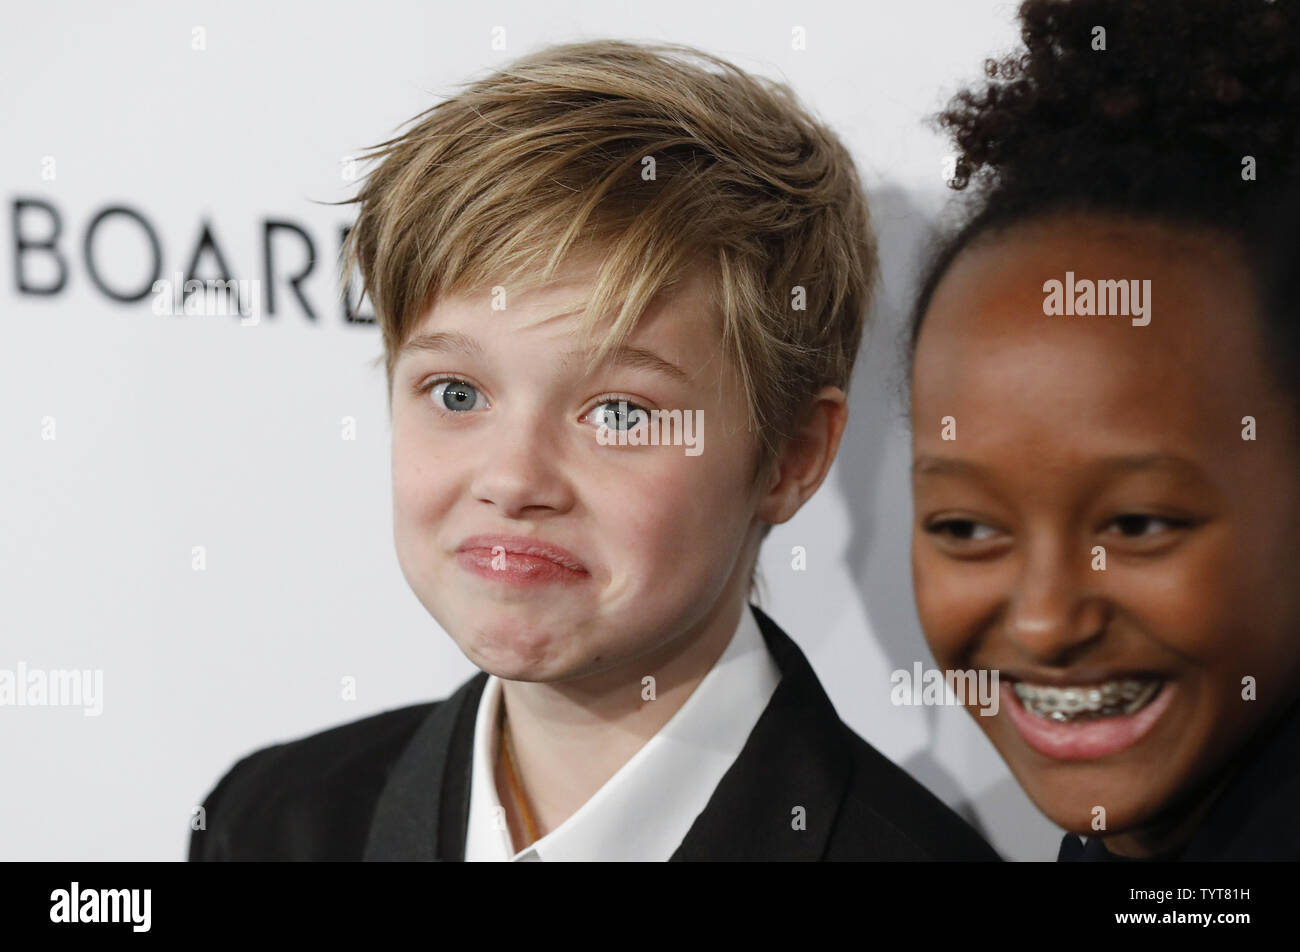 Shiloh Jolie-Pitt and Zahara Jolie-Pitt arrive on the red carpet at the National Board of Review Annual Awards Gala at Cipriani 42nd Street in New York City on January 9, 2018. The National Board of Review's awards celebrate excellence in filmmaking with categories that include Best Picture, Best Director, Best Actor and Actress, Best Original and Adapted Screenplay, Breakthrough Performance, and Directorial Debut, as well as signature honors such as the Freedom of Expression.        Photo by John Angelillo/UPI Stock Photo